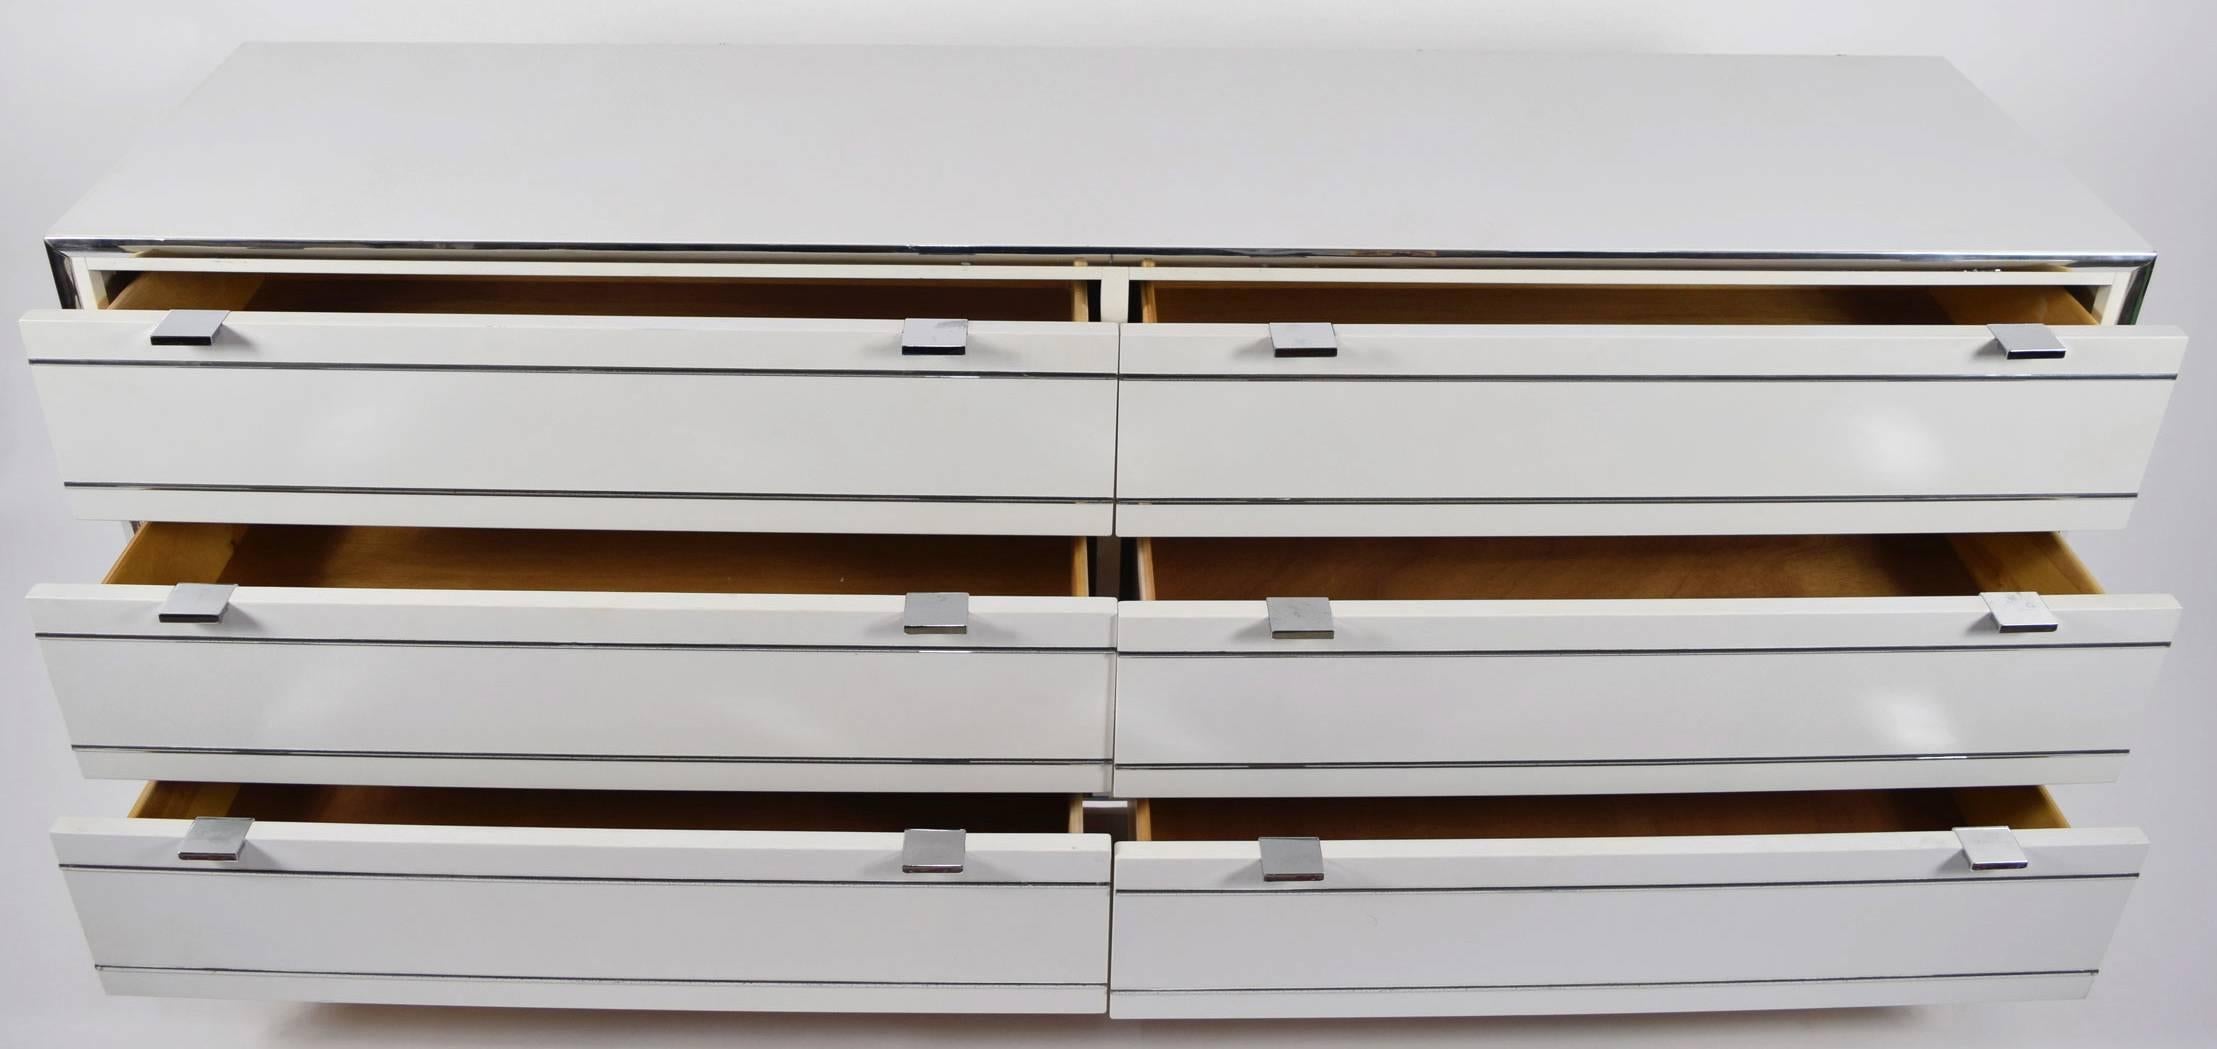 Canadian One Rougier Dresser or Cabinet in White Laminate and Chrome